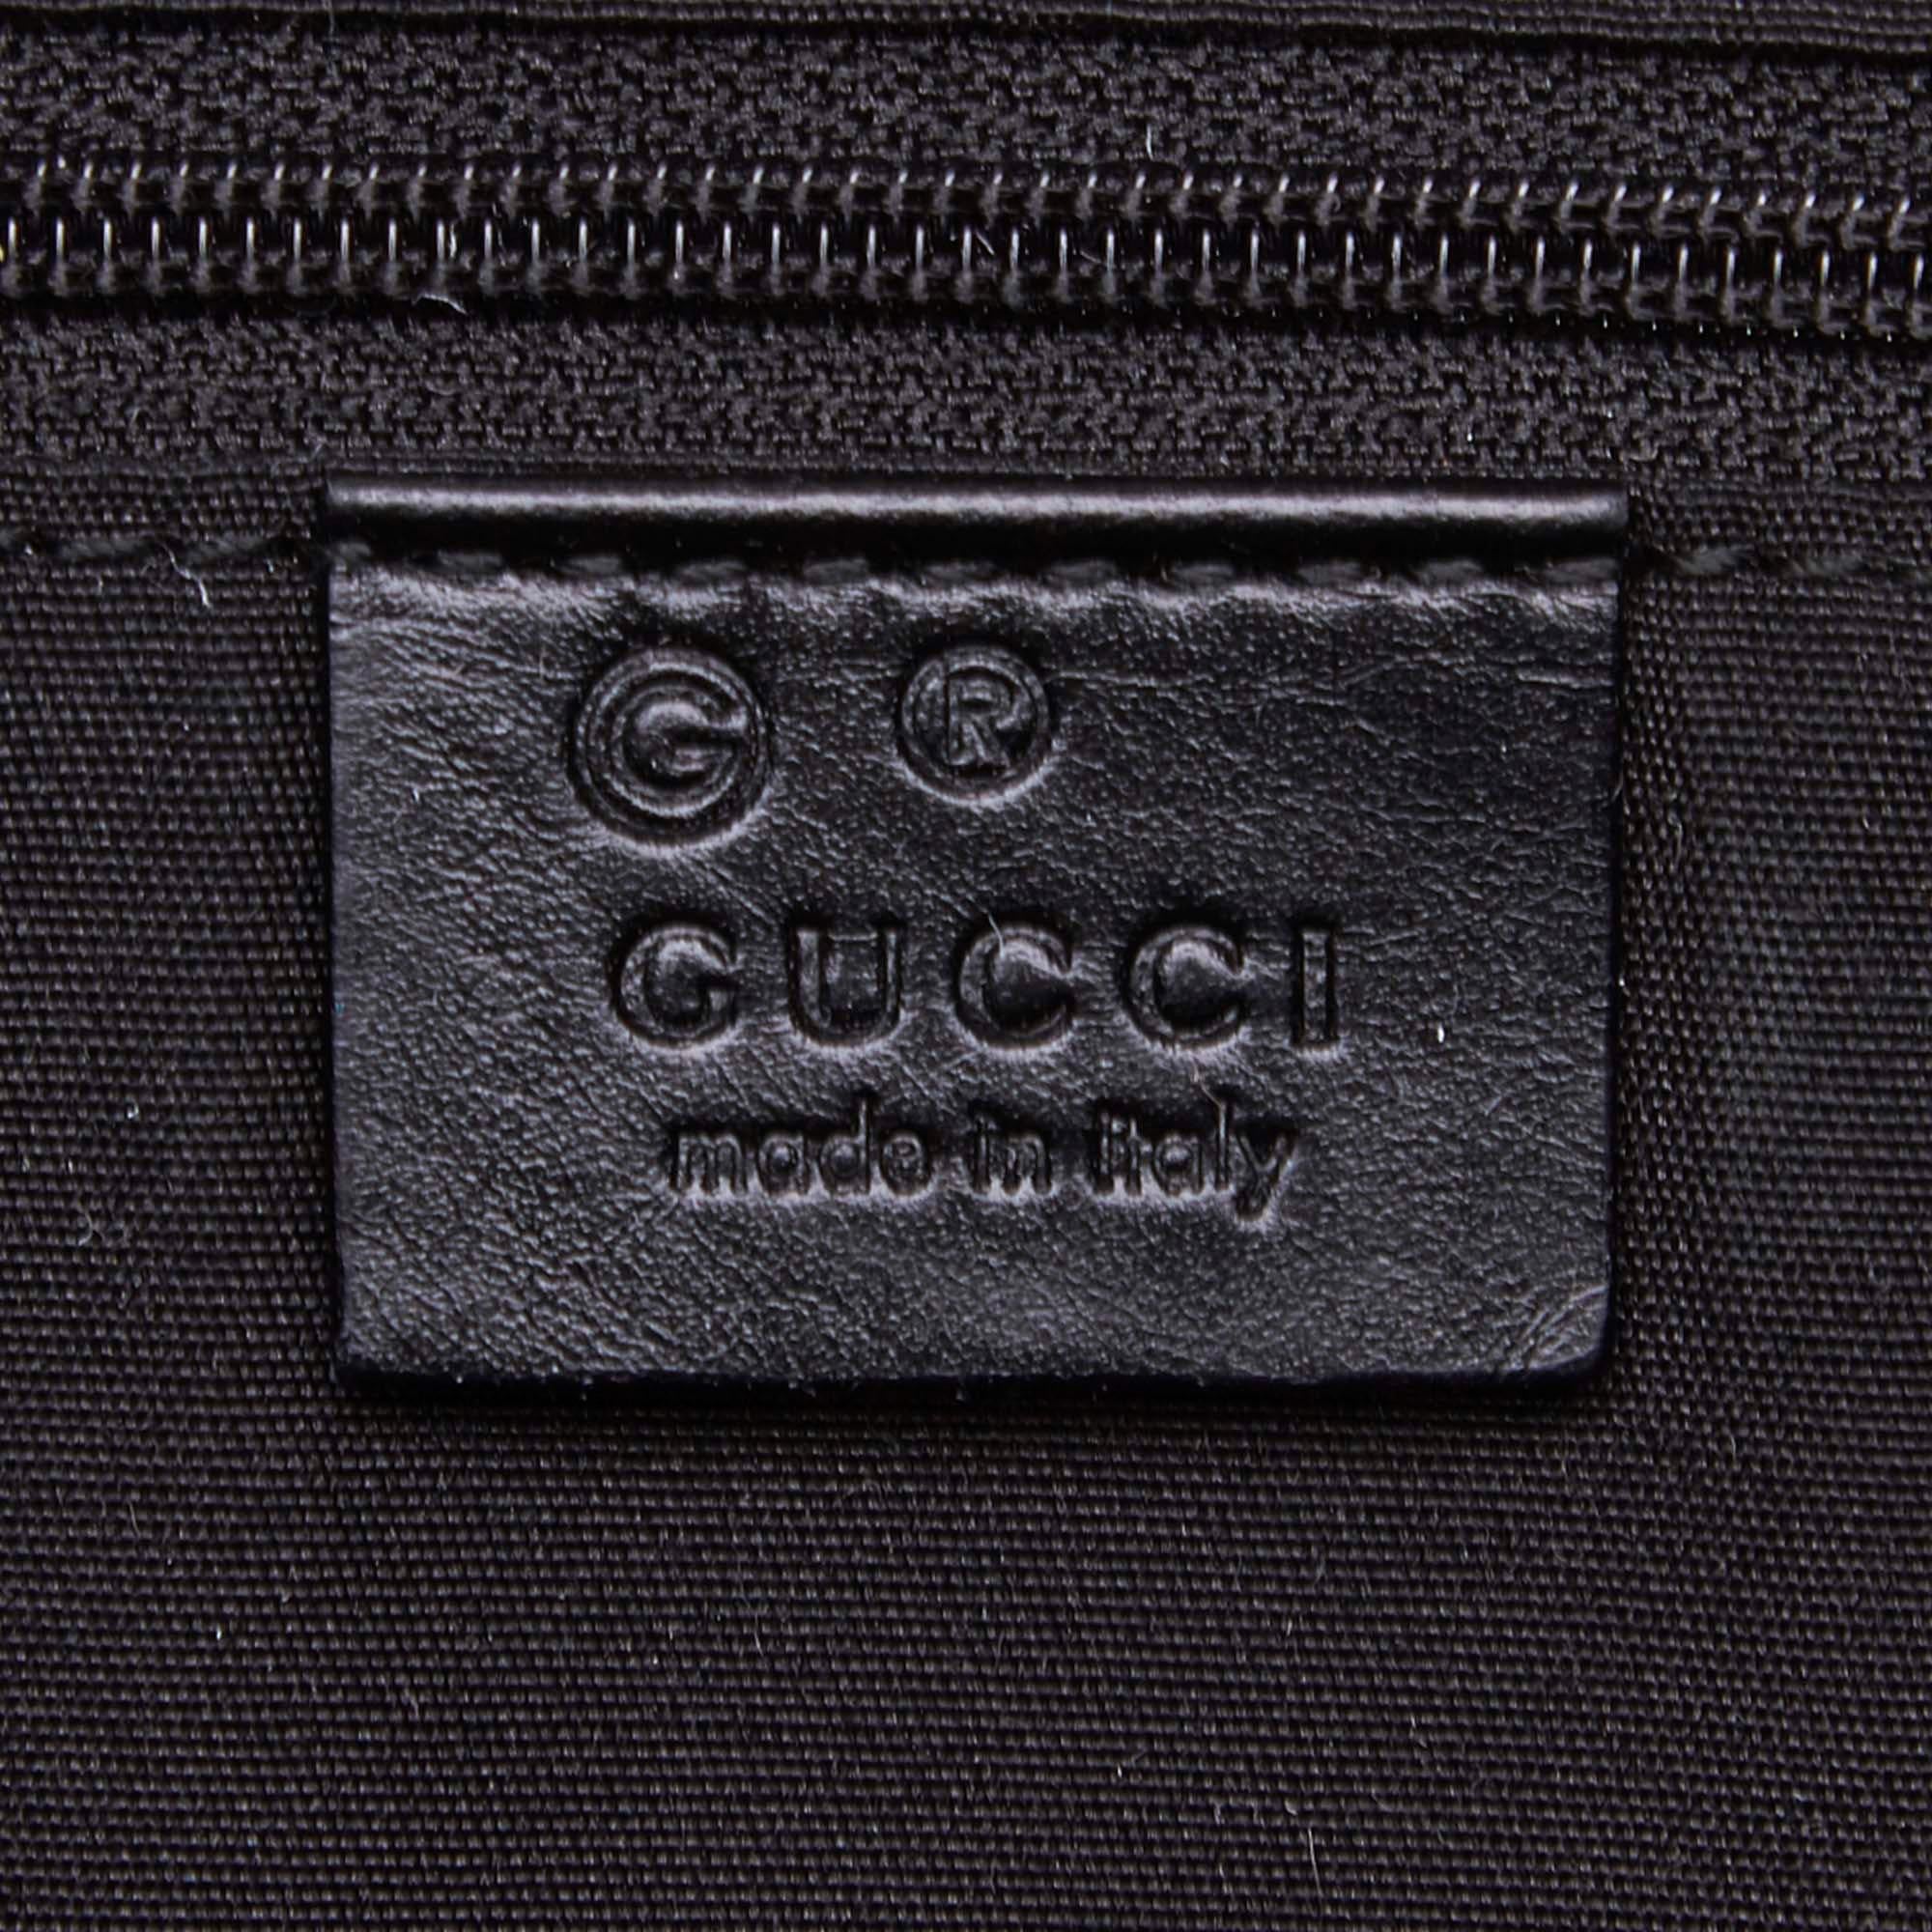 Vintage Authentic Gucci Black Canvas Fabric GG Shoulder Bag Italy LARGE  For Sale 2